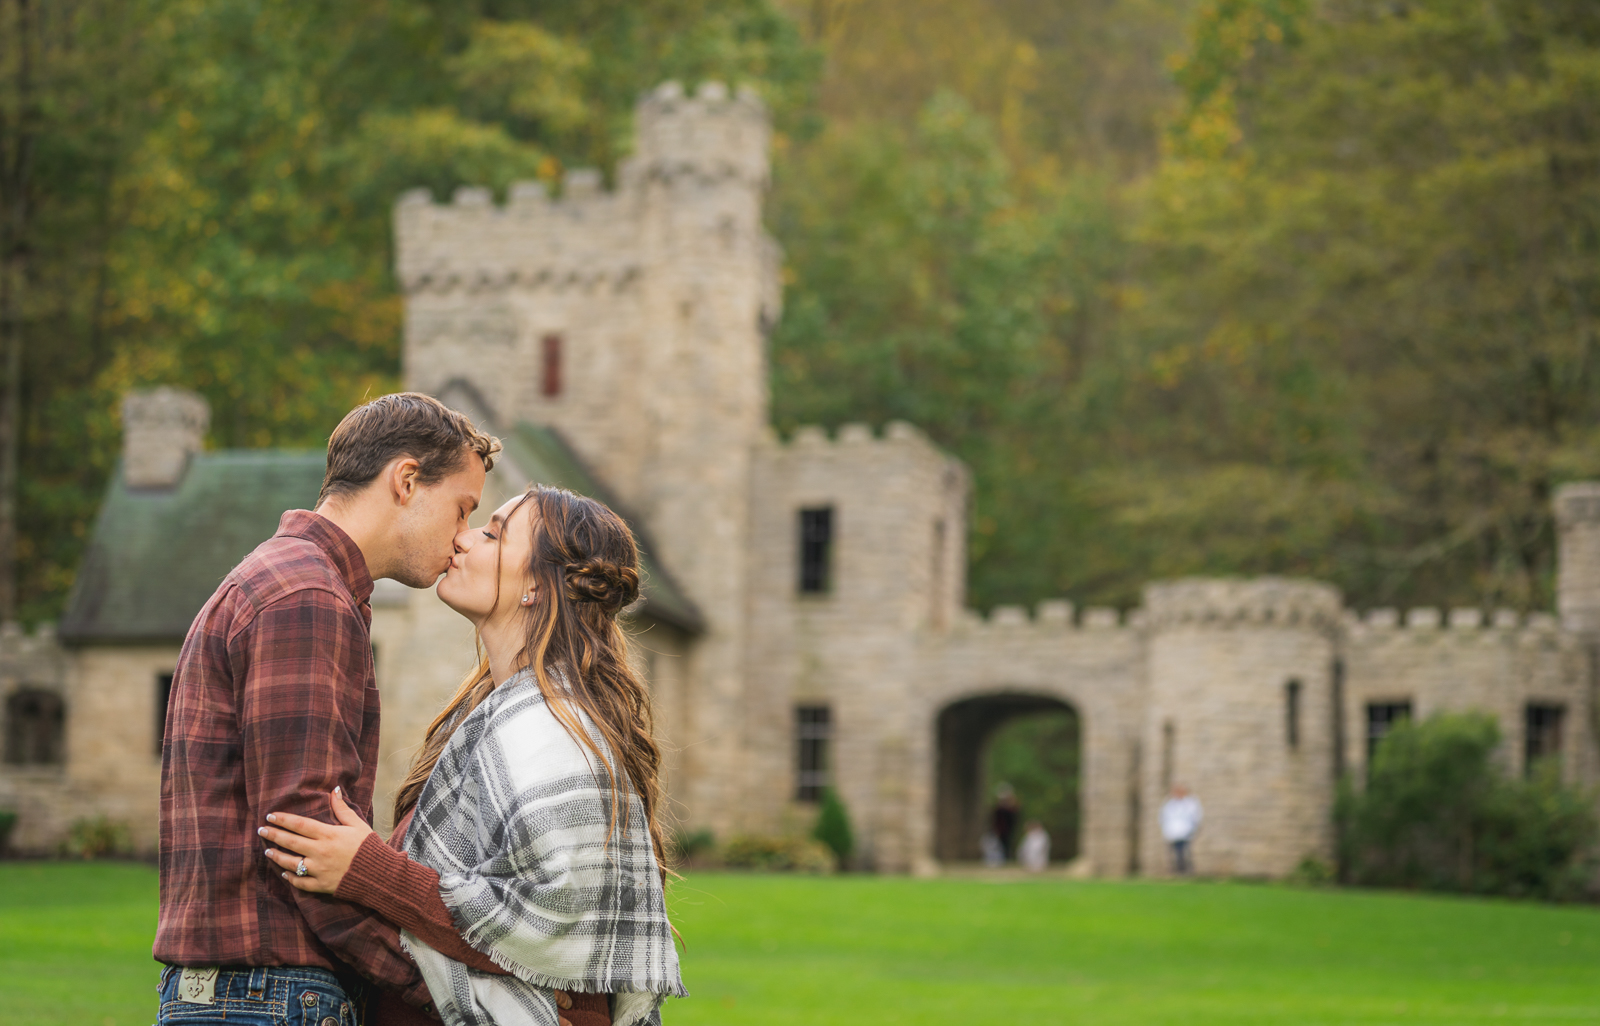 Samuel + Gabby’s Fall Engagement Photos at Squire’s Castle